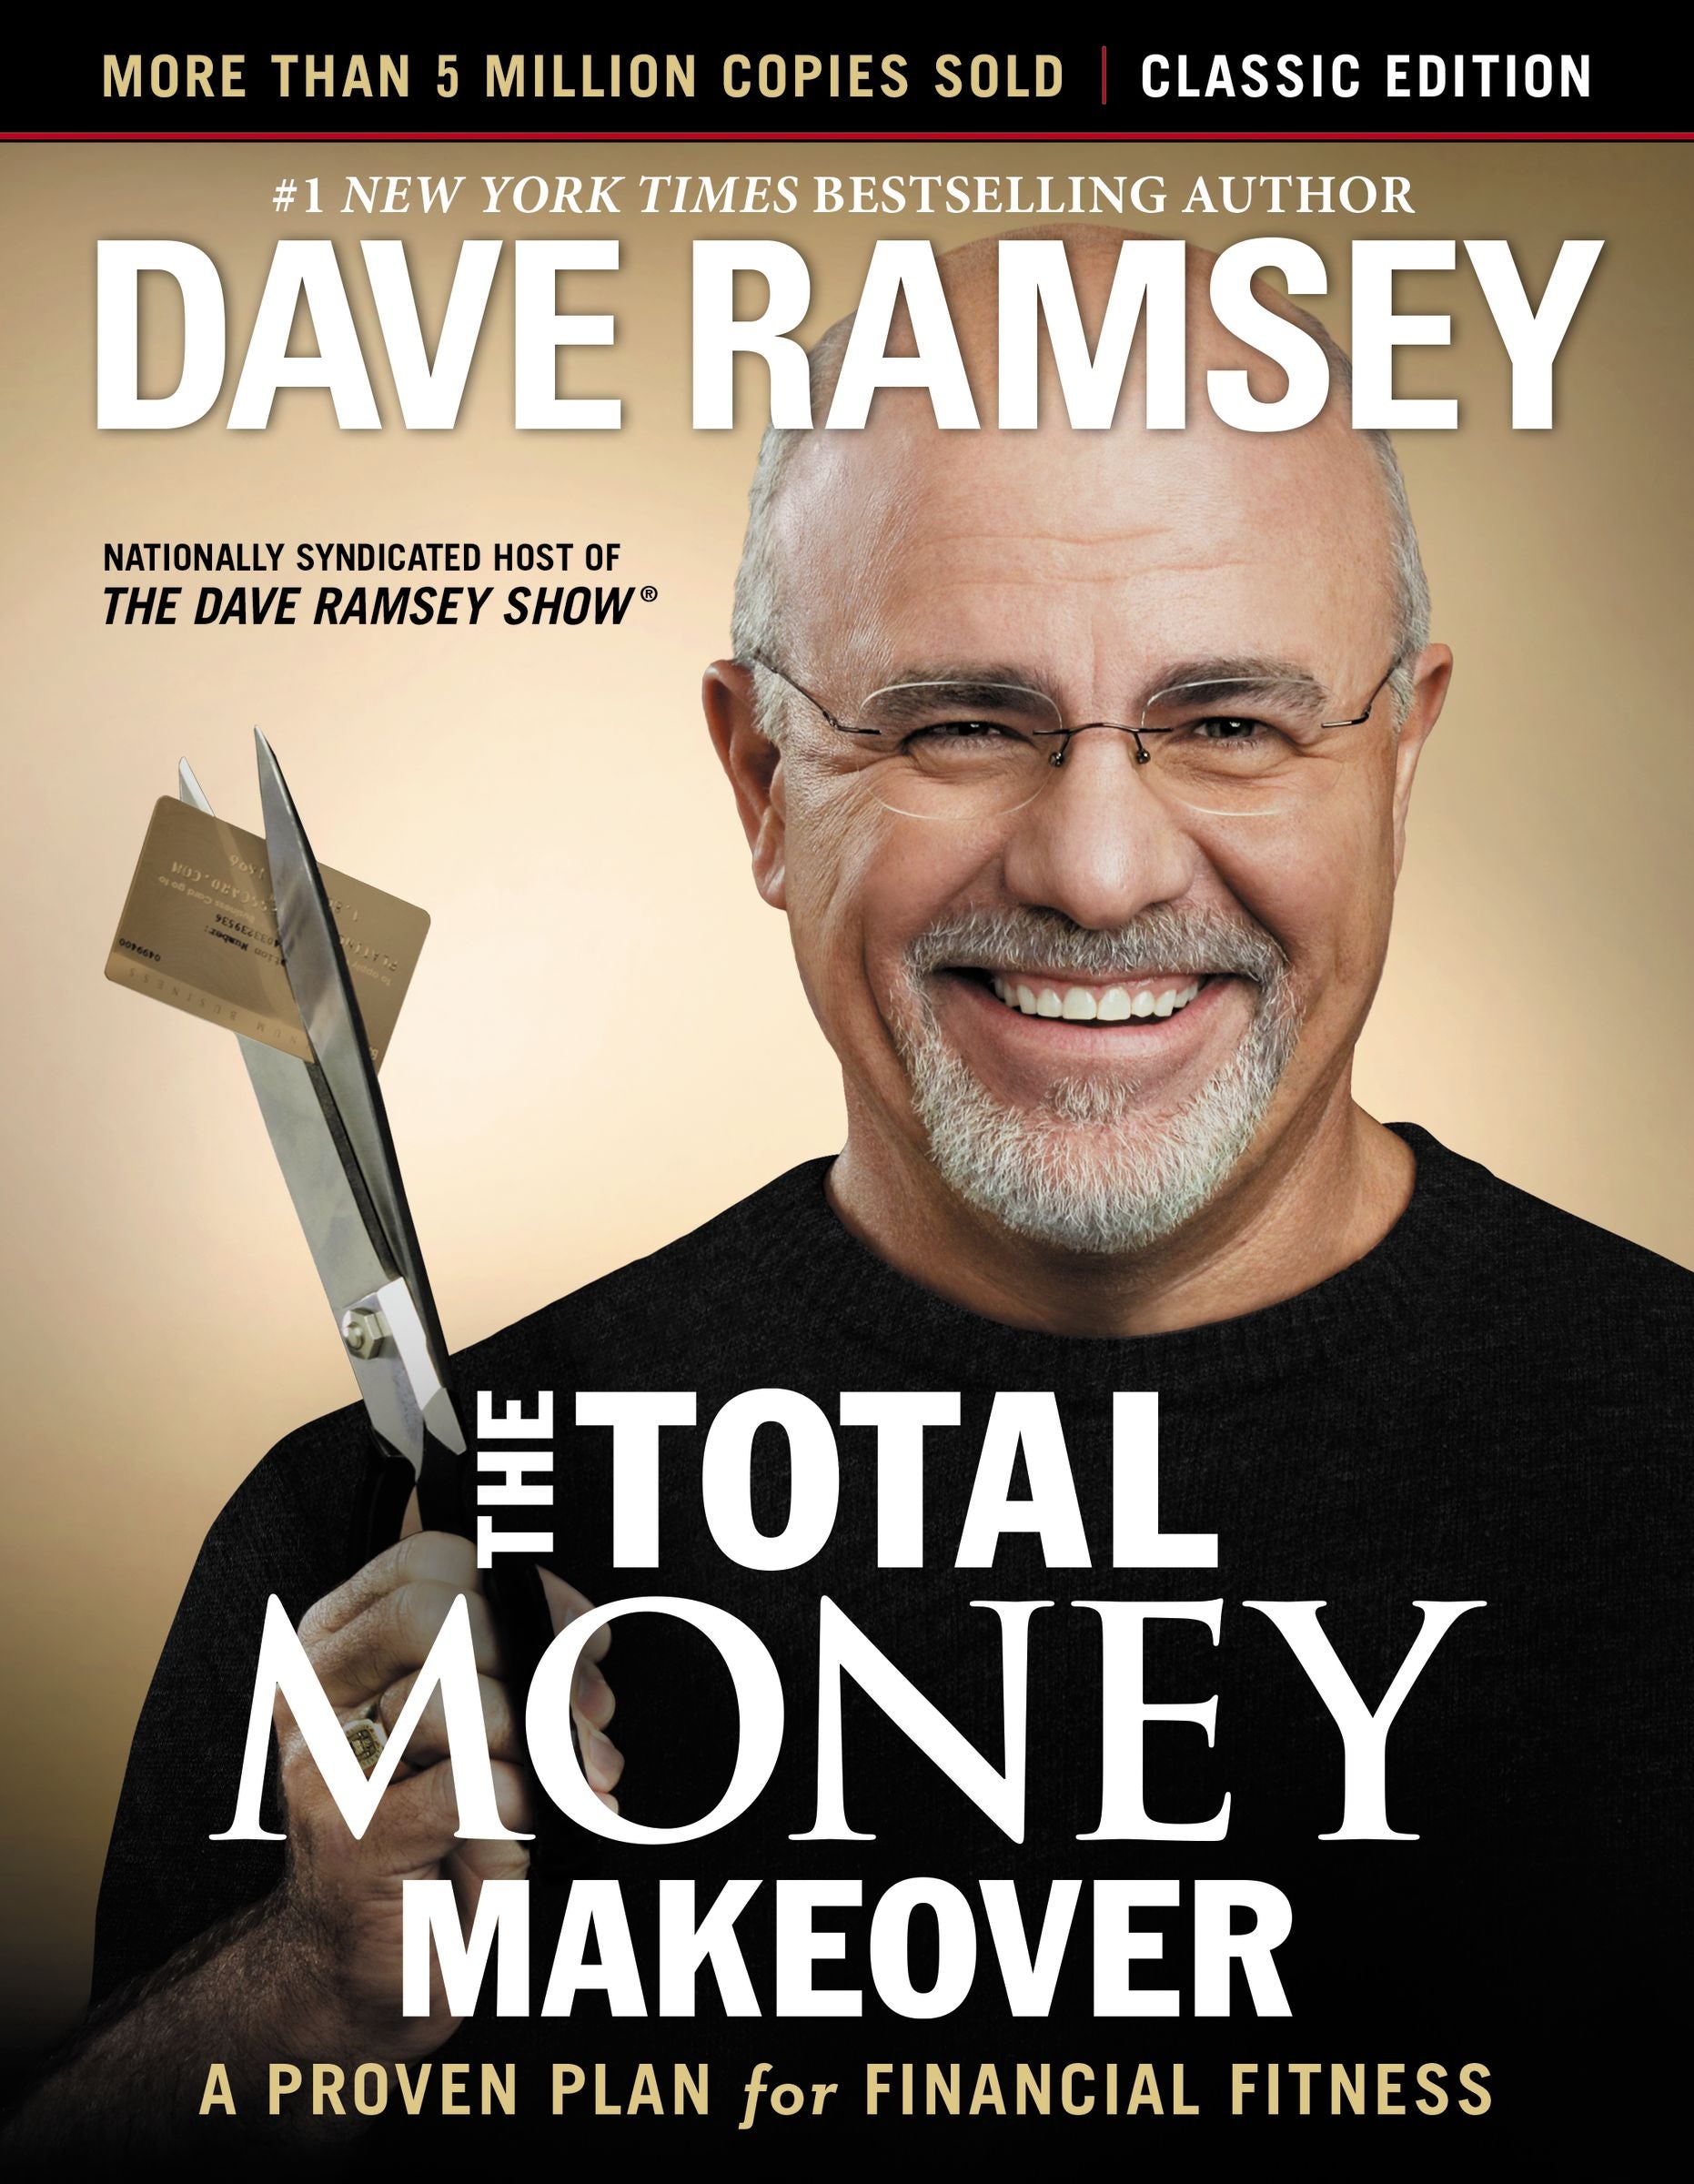 Cover of "The Total Money Makeover: A Proven Plan for Financial Fitness"